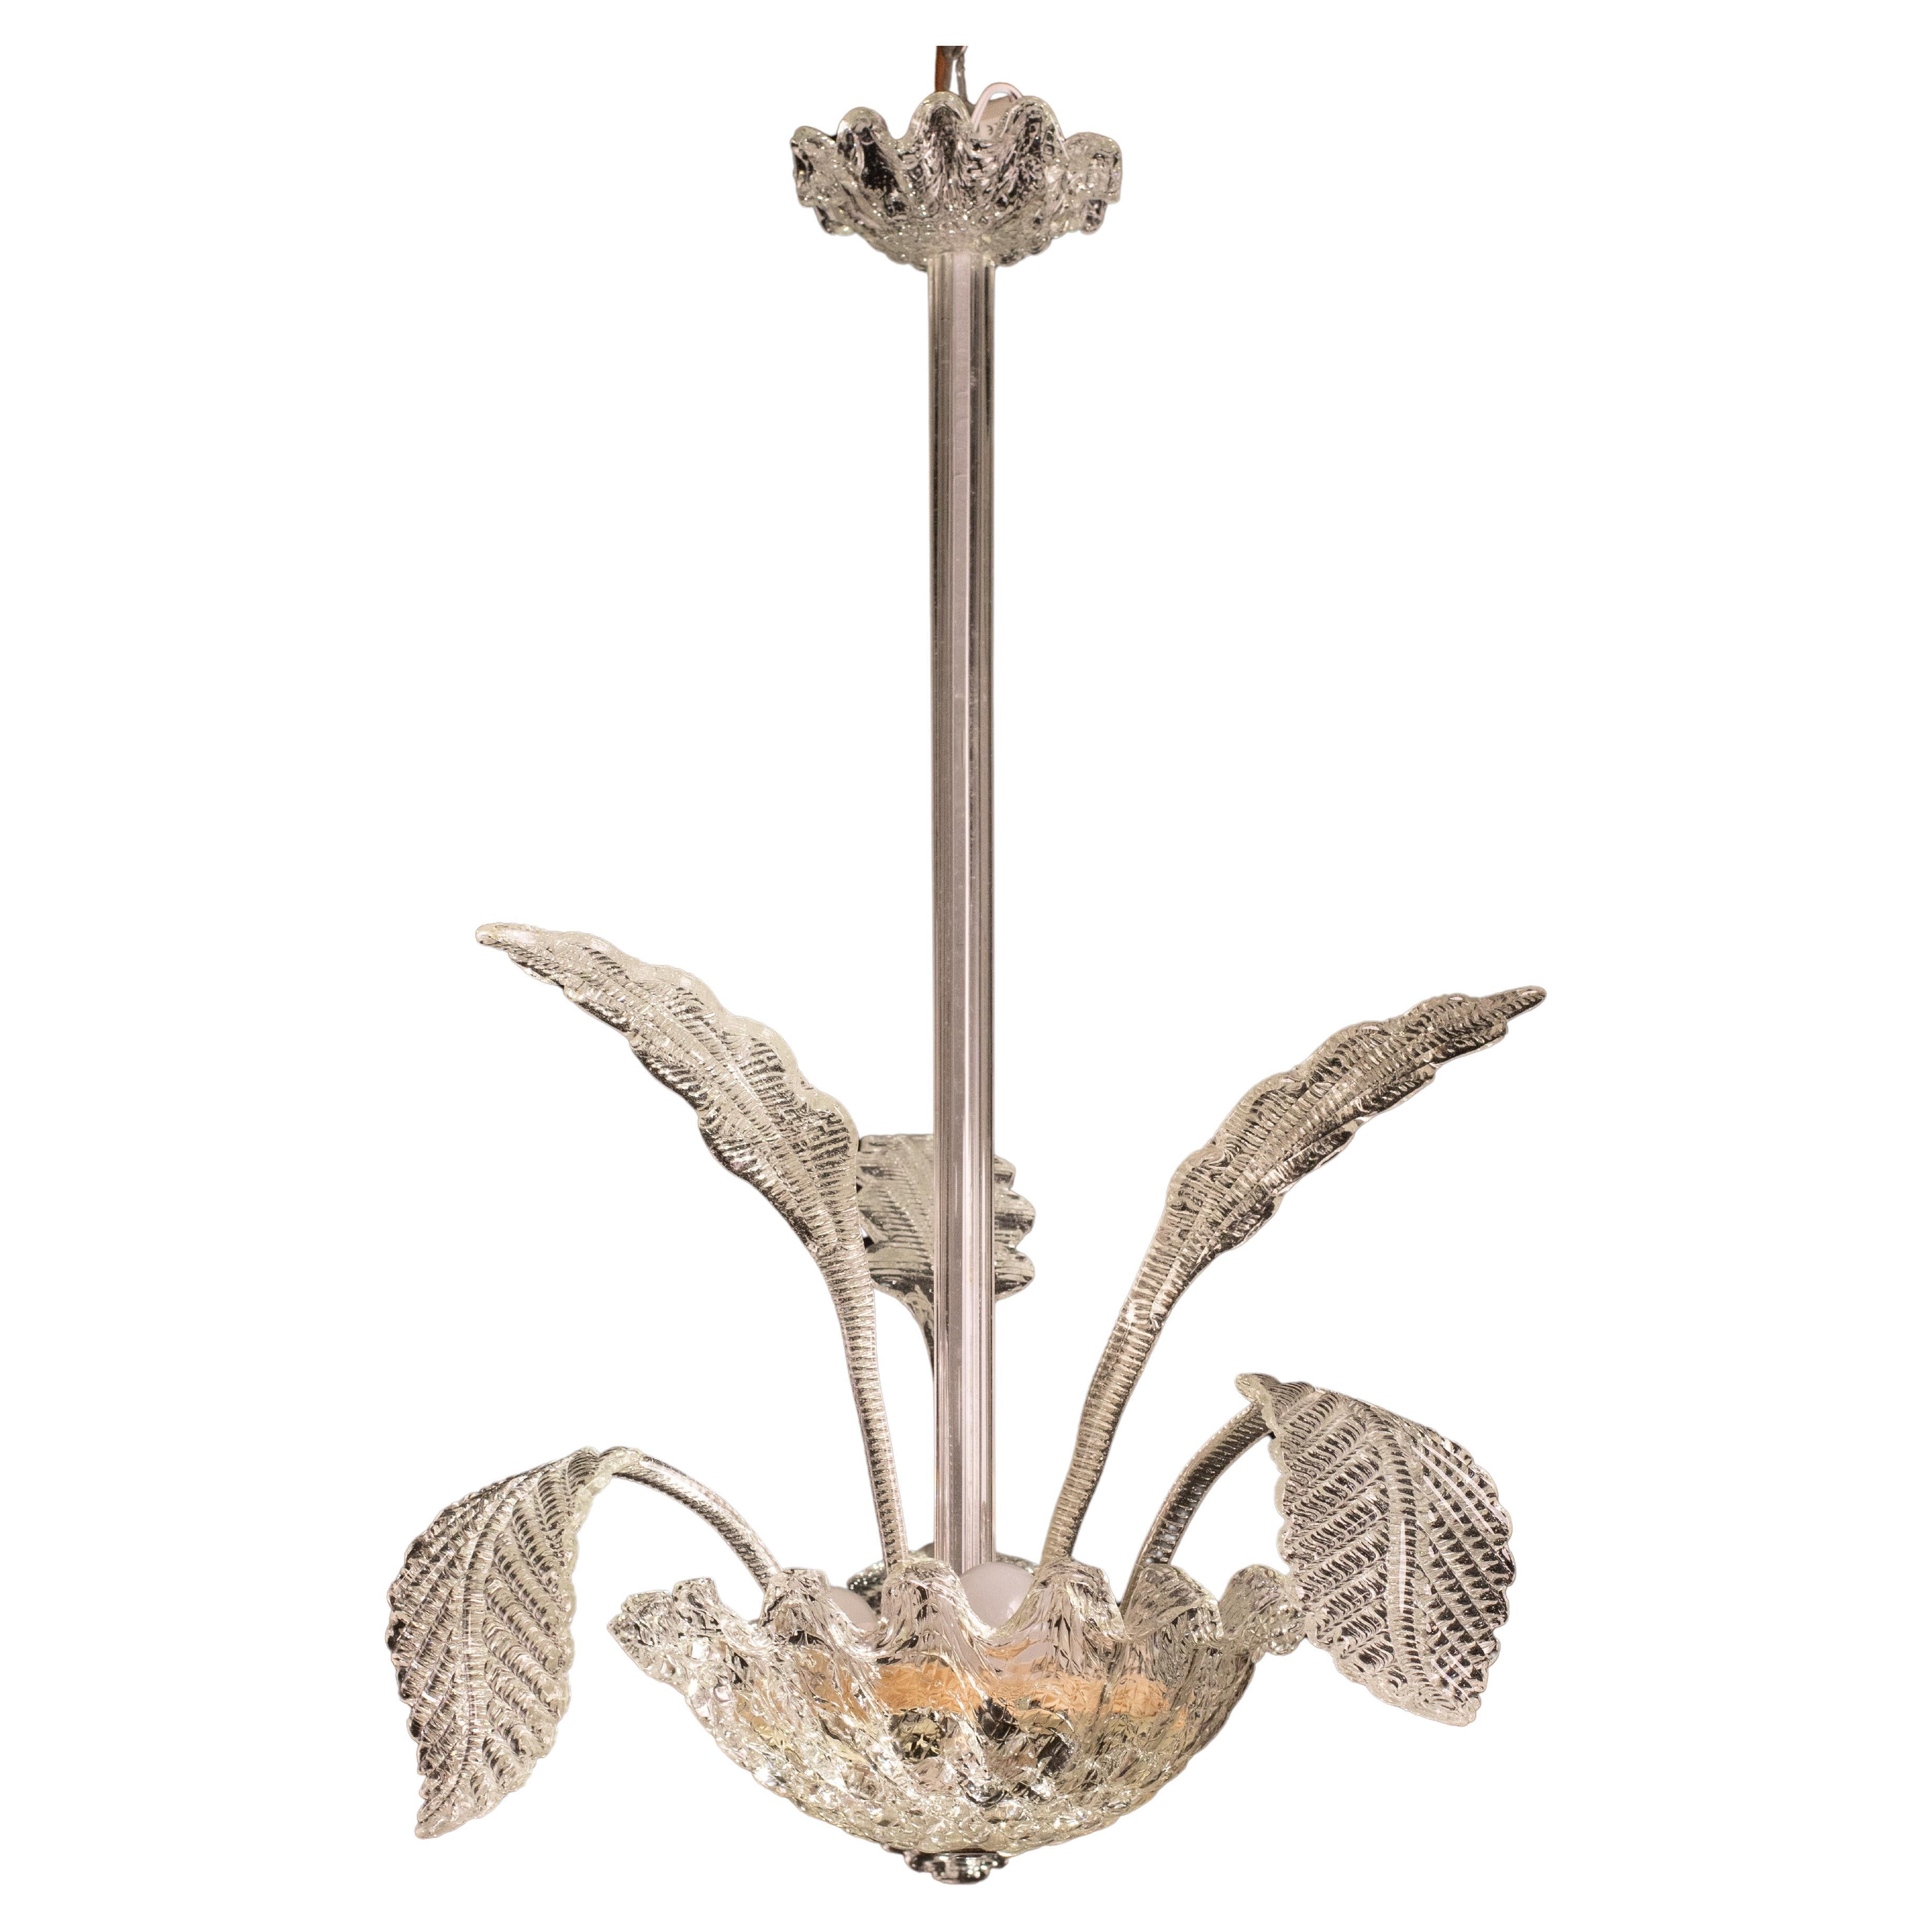 Charming Art Deco chandelier made by the glassworks Barovier & Toso in the 1940s-1950s.
The chandelier is 85 centimetres high and 60 centimetres wide.
It mounts three E14 lights, possible to switch for Usa standards. The chandelier is composed of